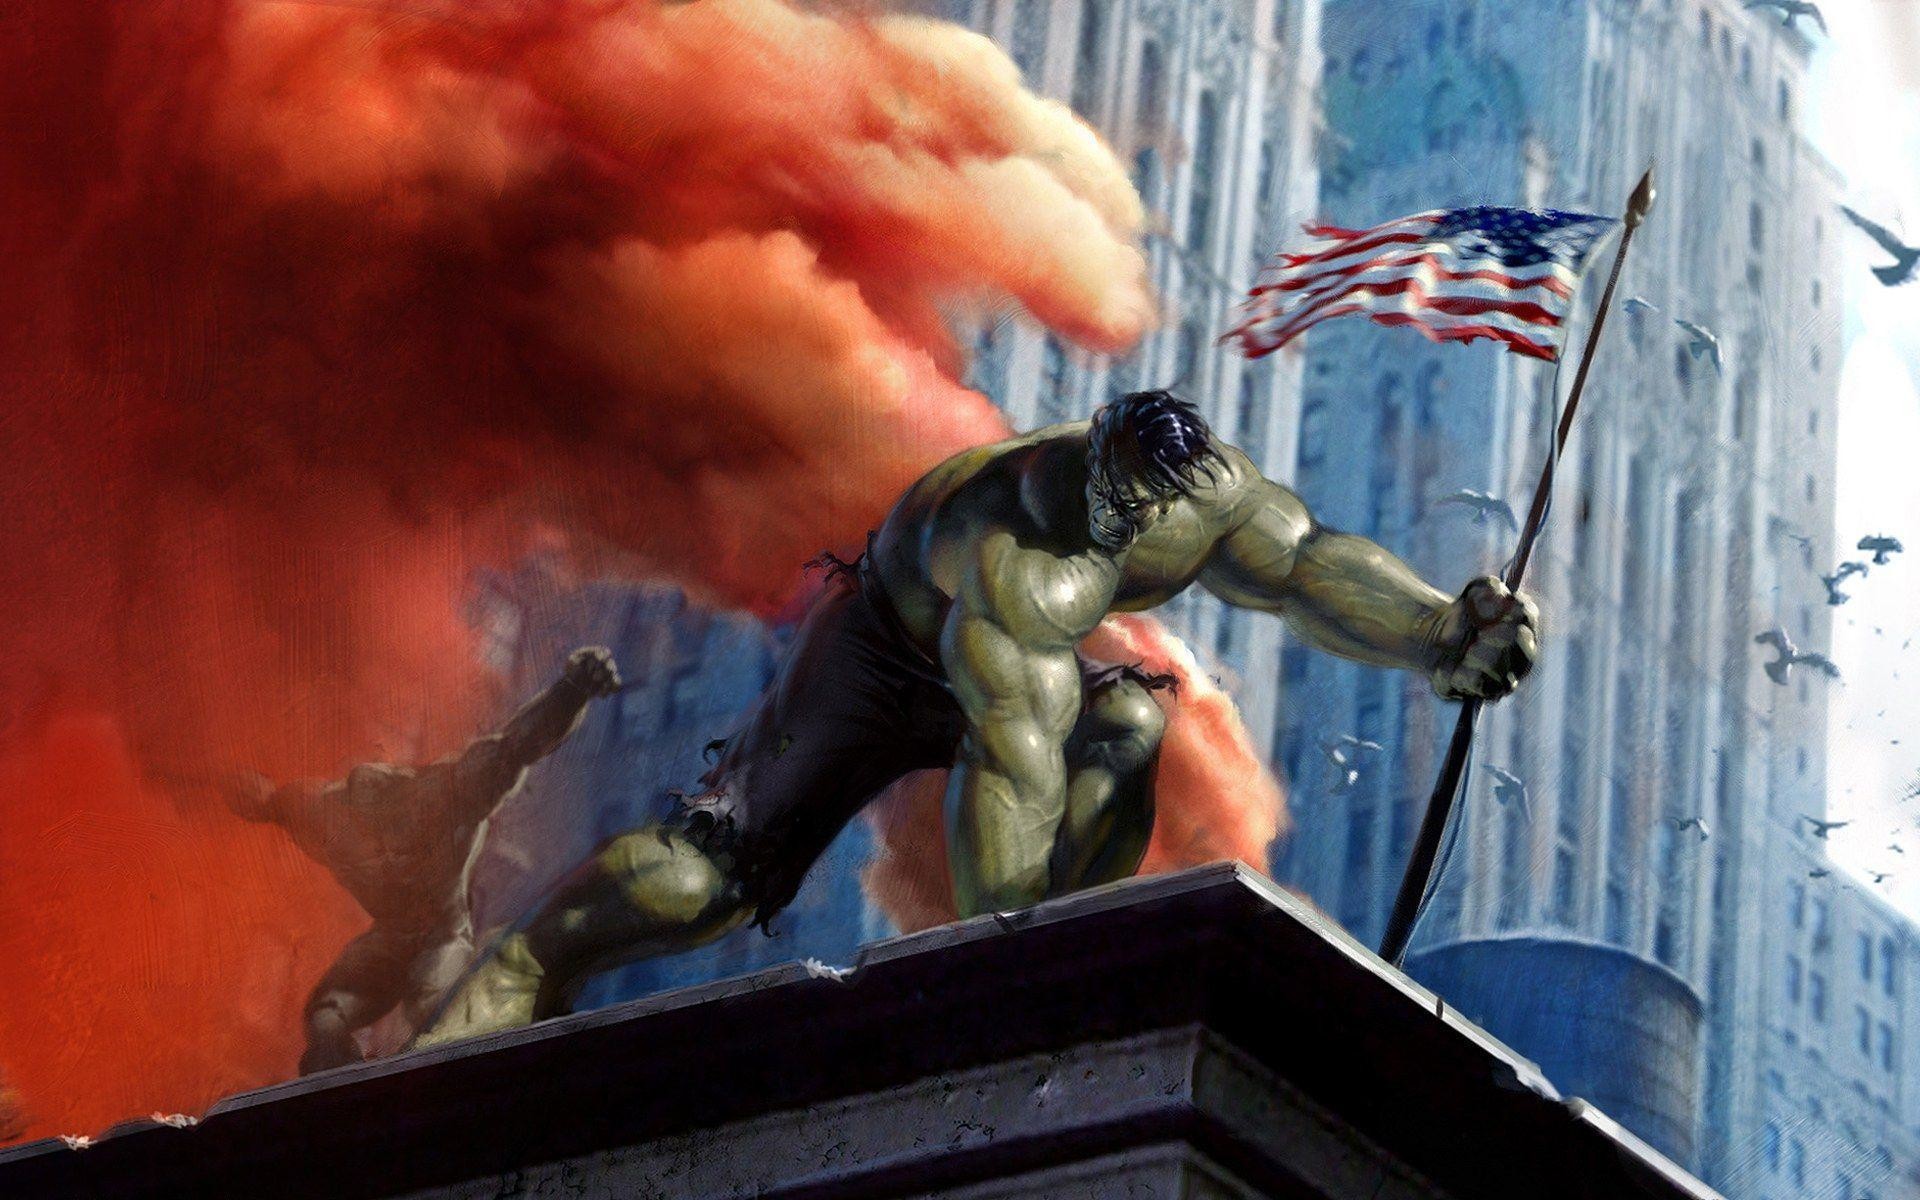 1920x1200 Most Downloaded Incredible Hulk Wallpapers - Full HD wallpaper search